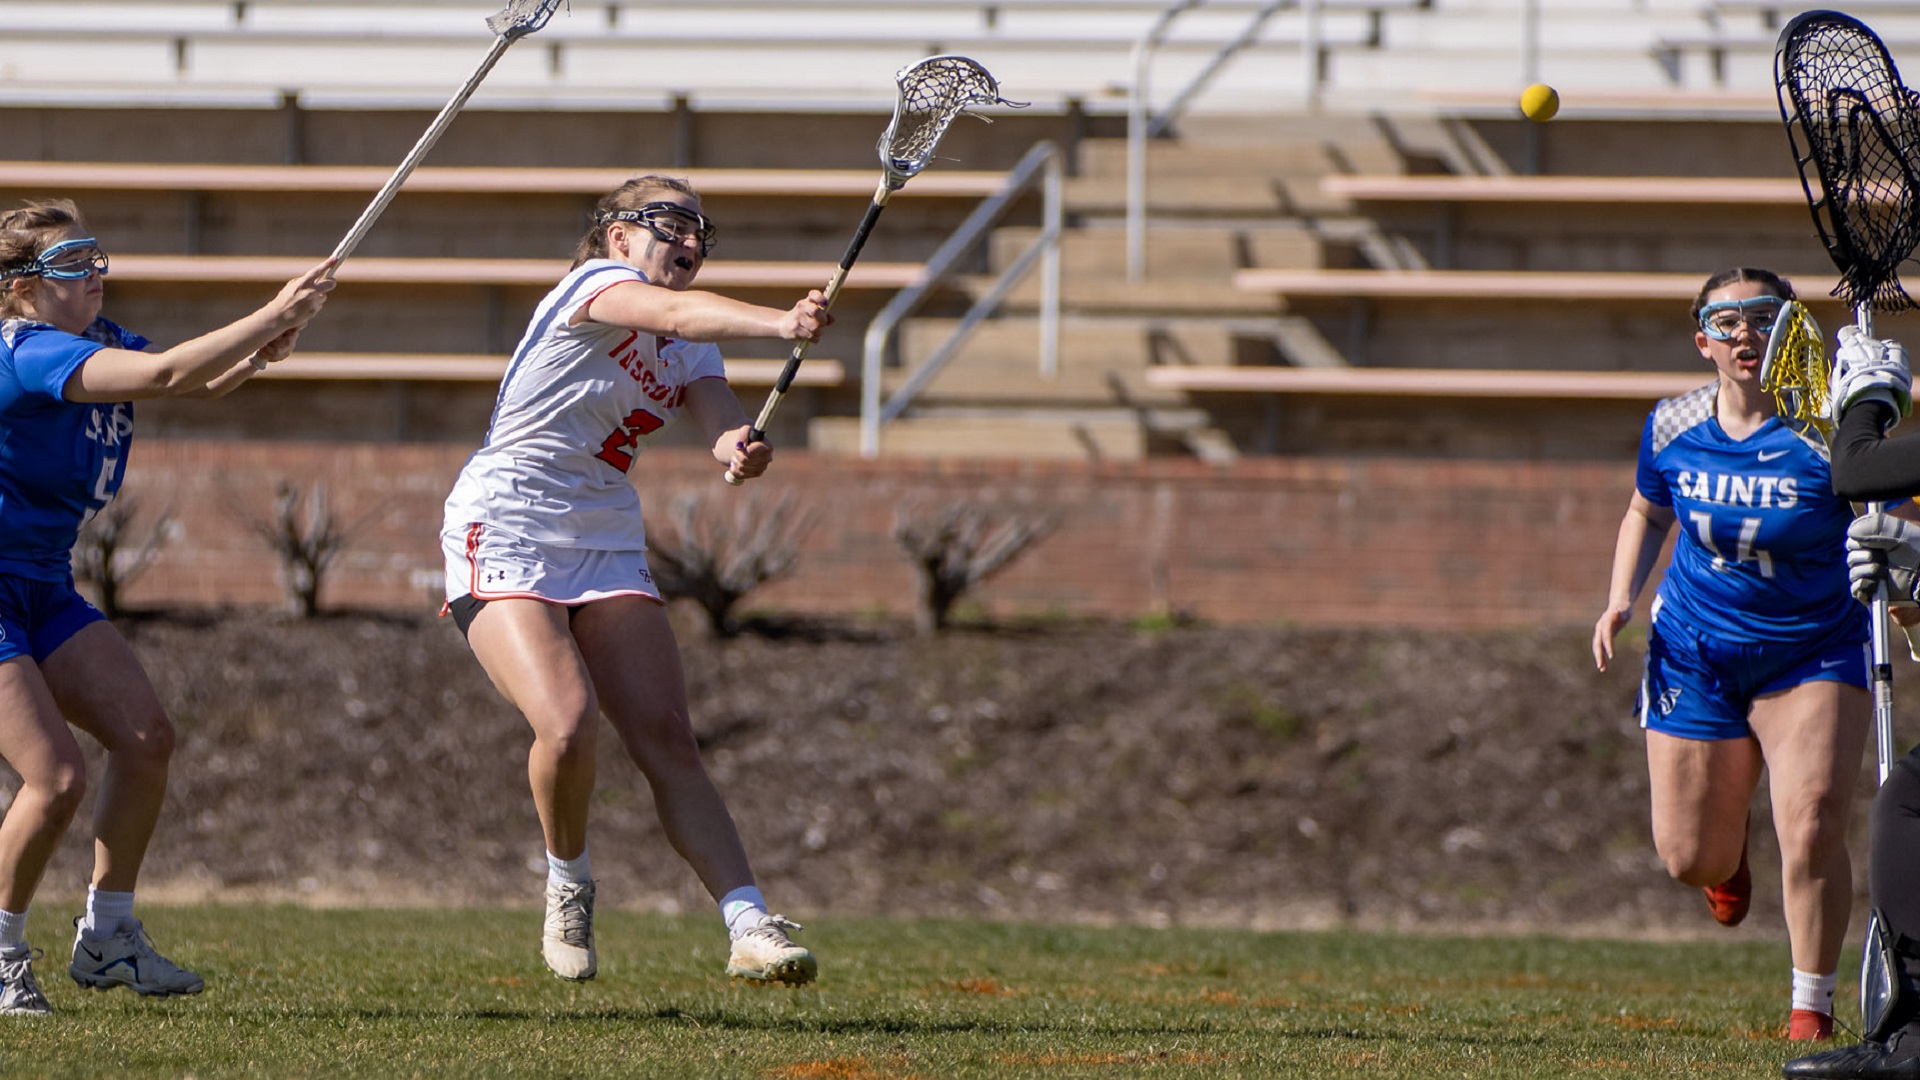 Abby Lockwood scores one of her six goals against Thomas More (photo by Kari Ham)